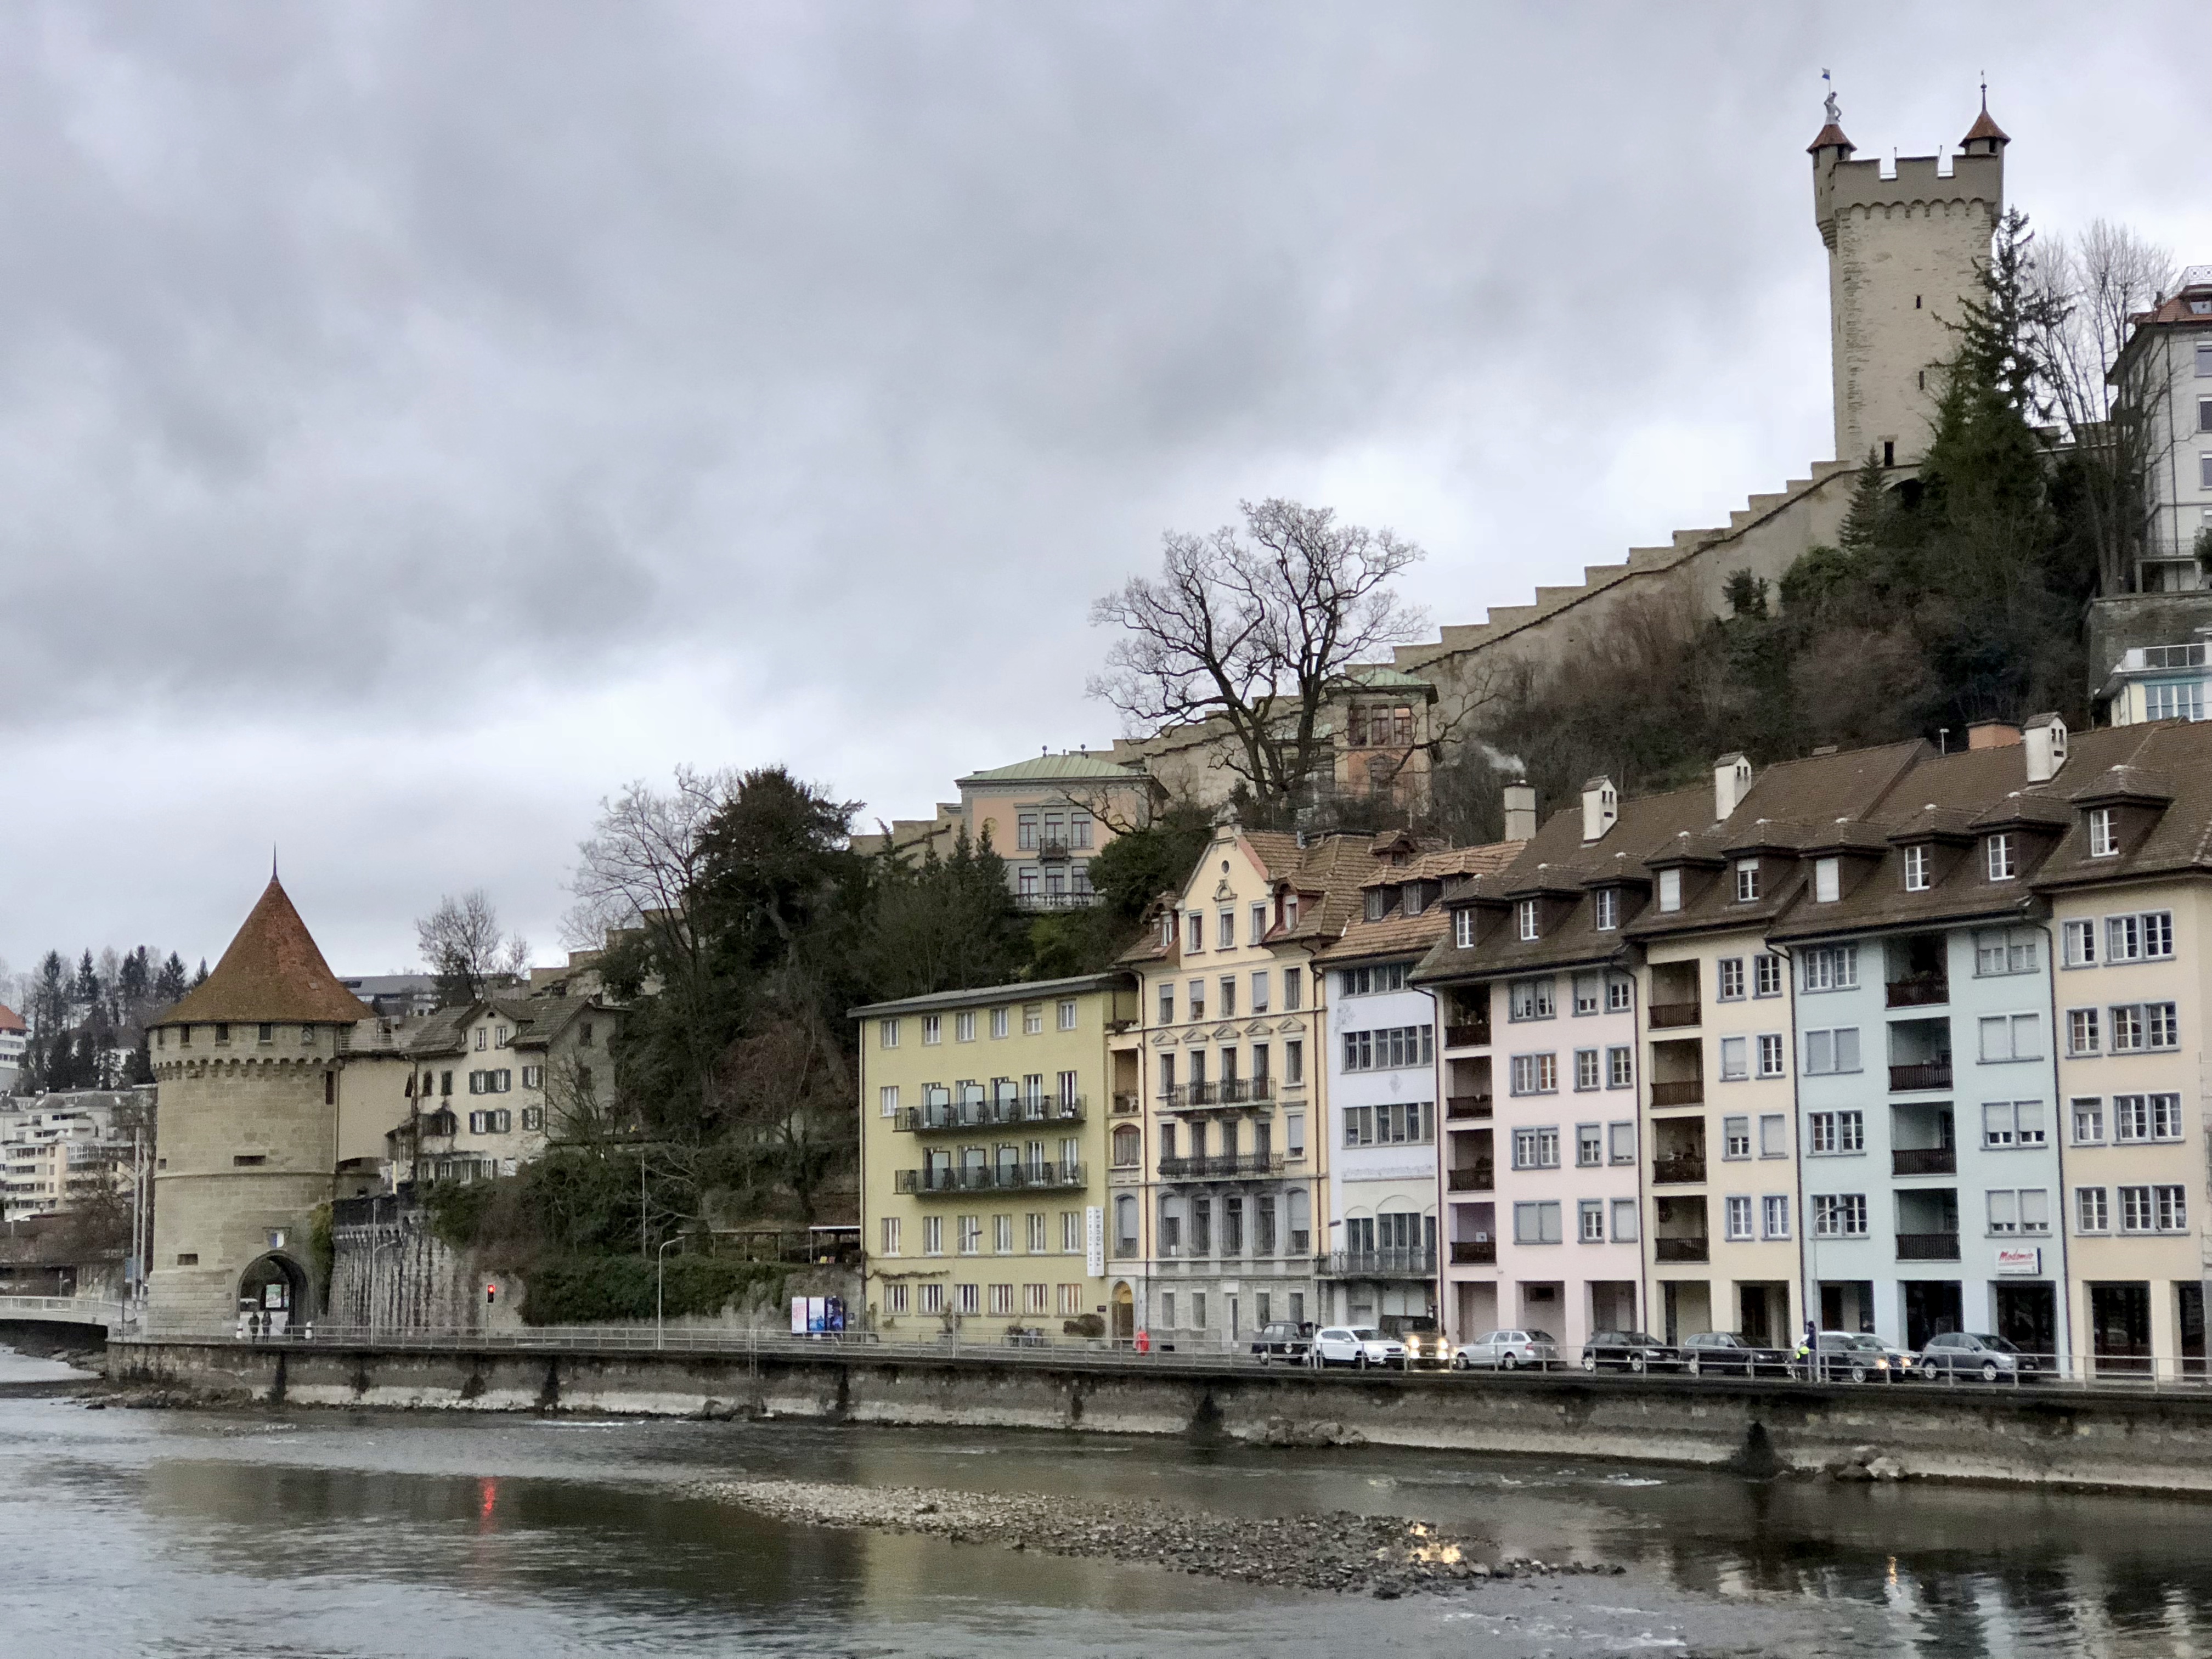 Lucerne, Switzerland, with an old fortress on the hill.